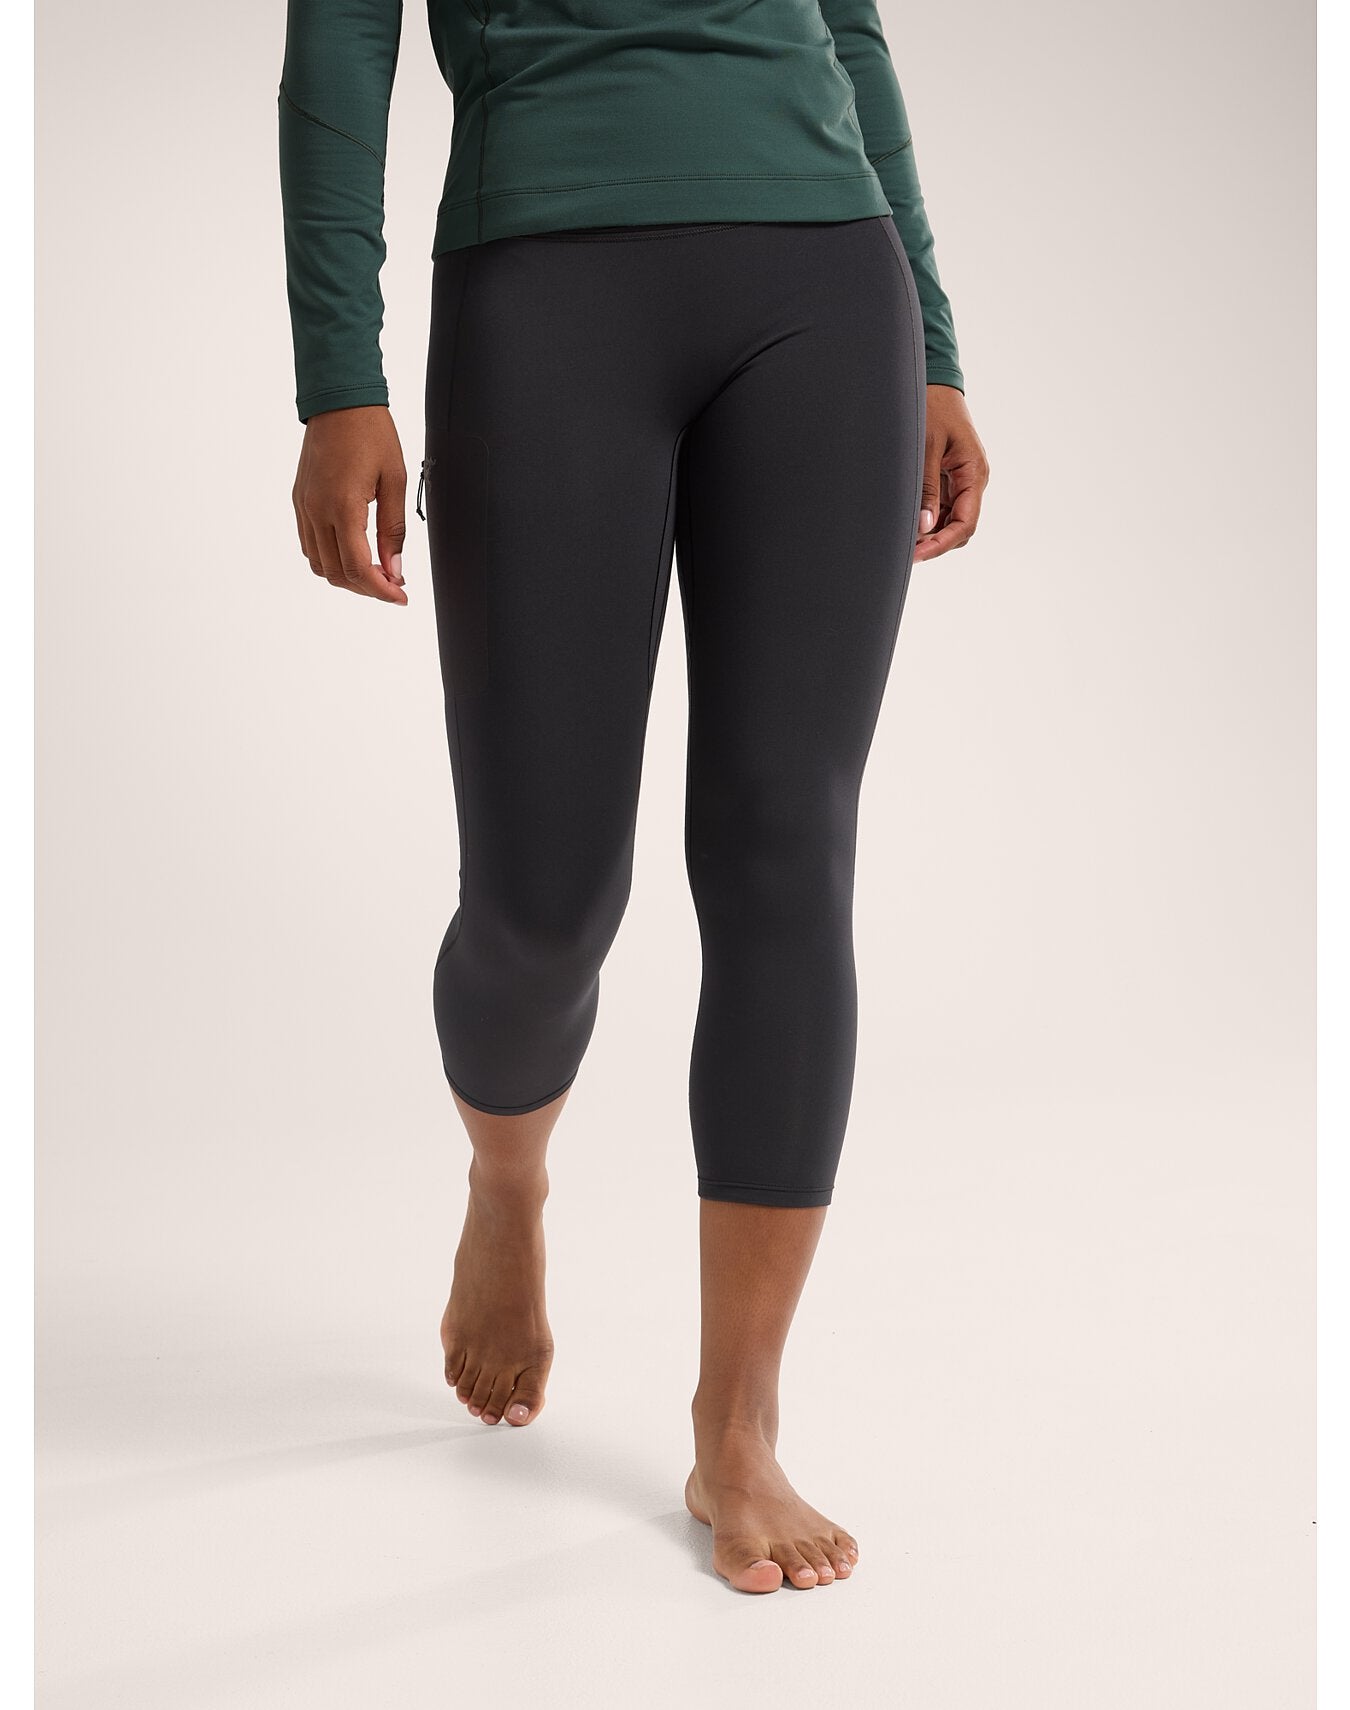 Lululemon Zoned In Tight 27 BLACK Breathability Seamless